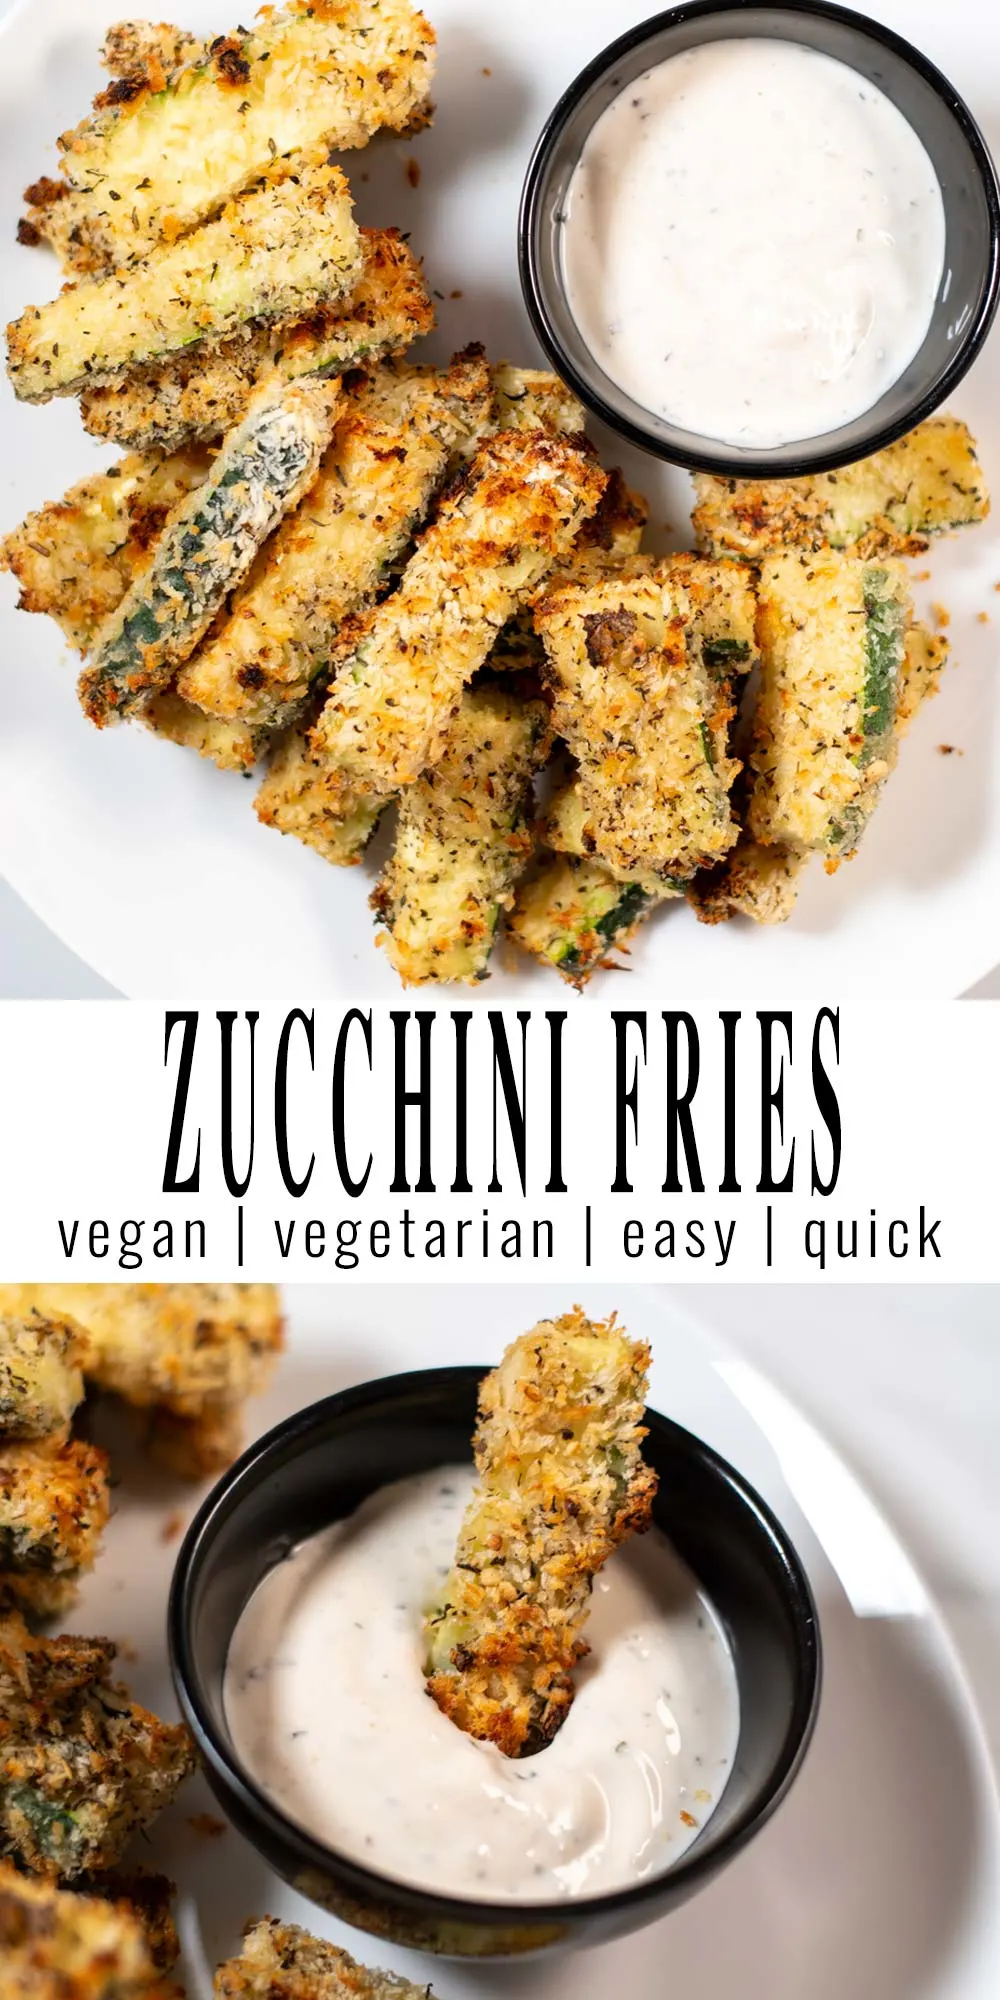 Collage of two photos of Zucchini Fries with recipe title text.